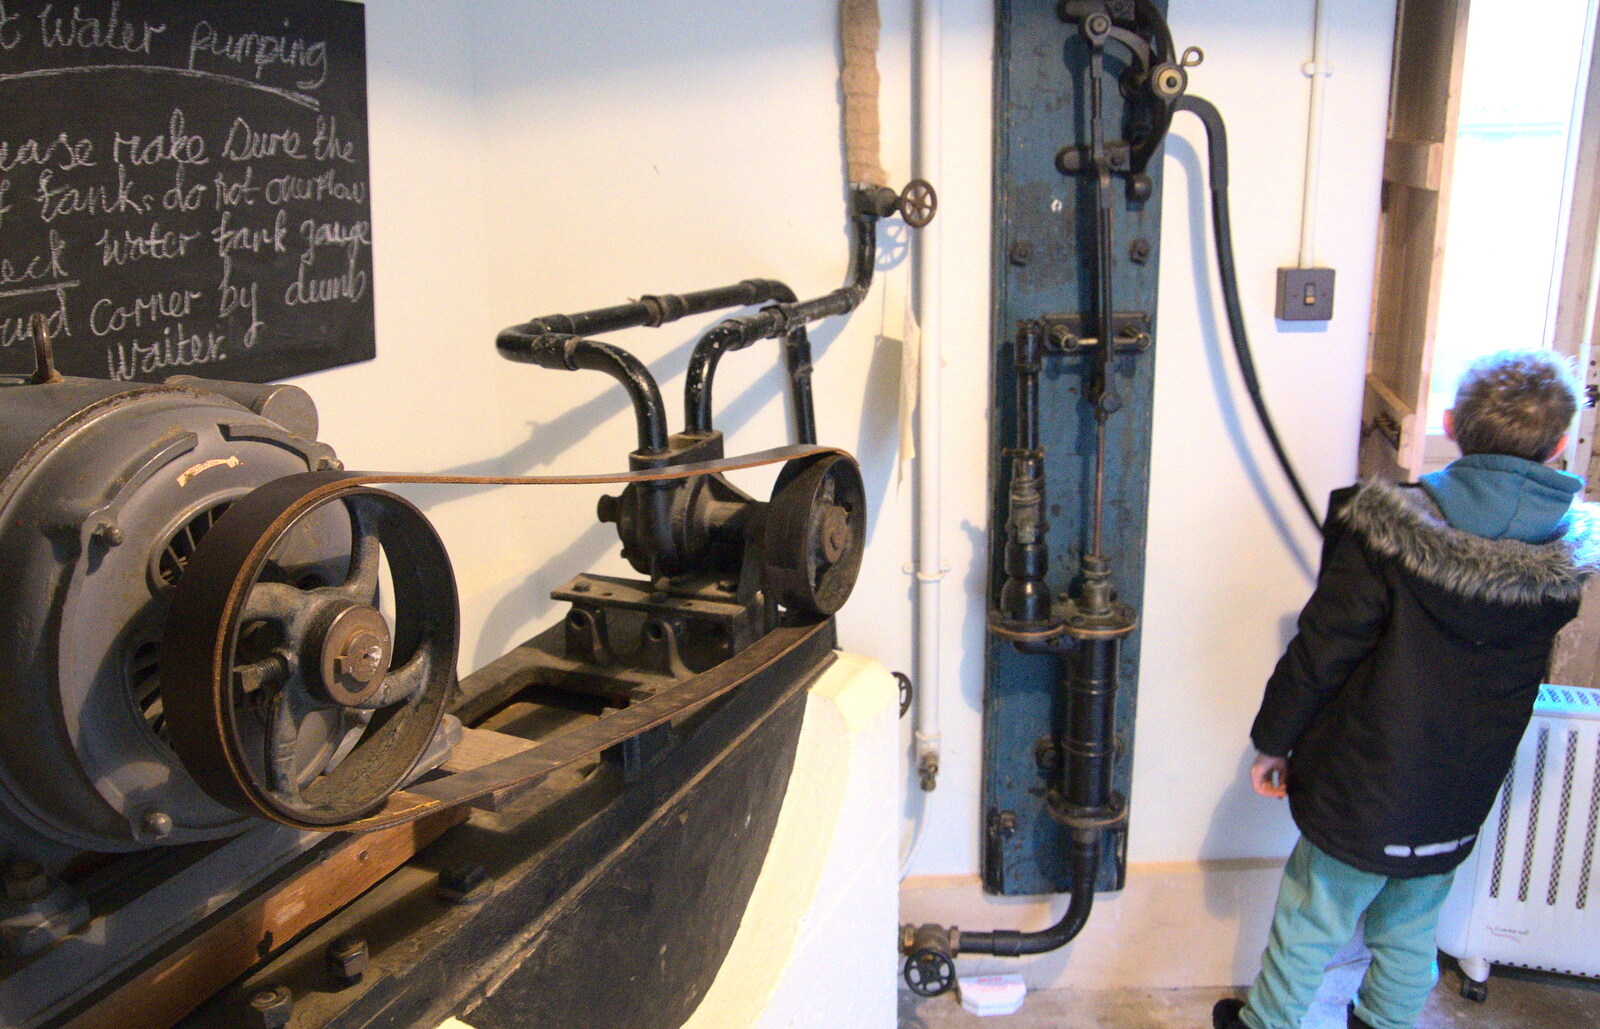 Fred and a water pump from Life Below Stairs, Ickworth House, Horringer, Suffolk - 28th January 2018